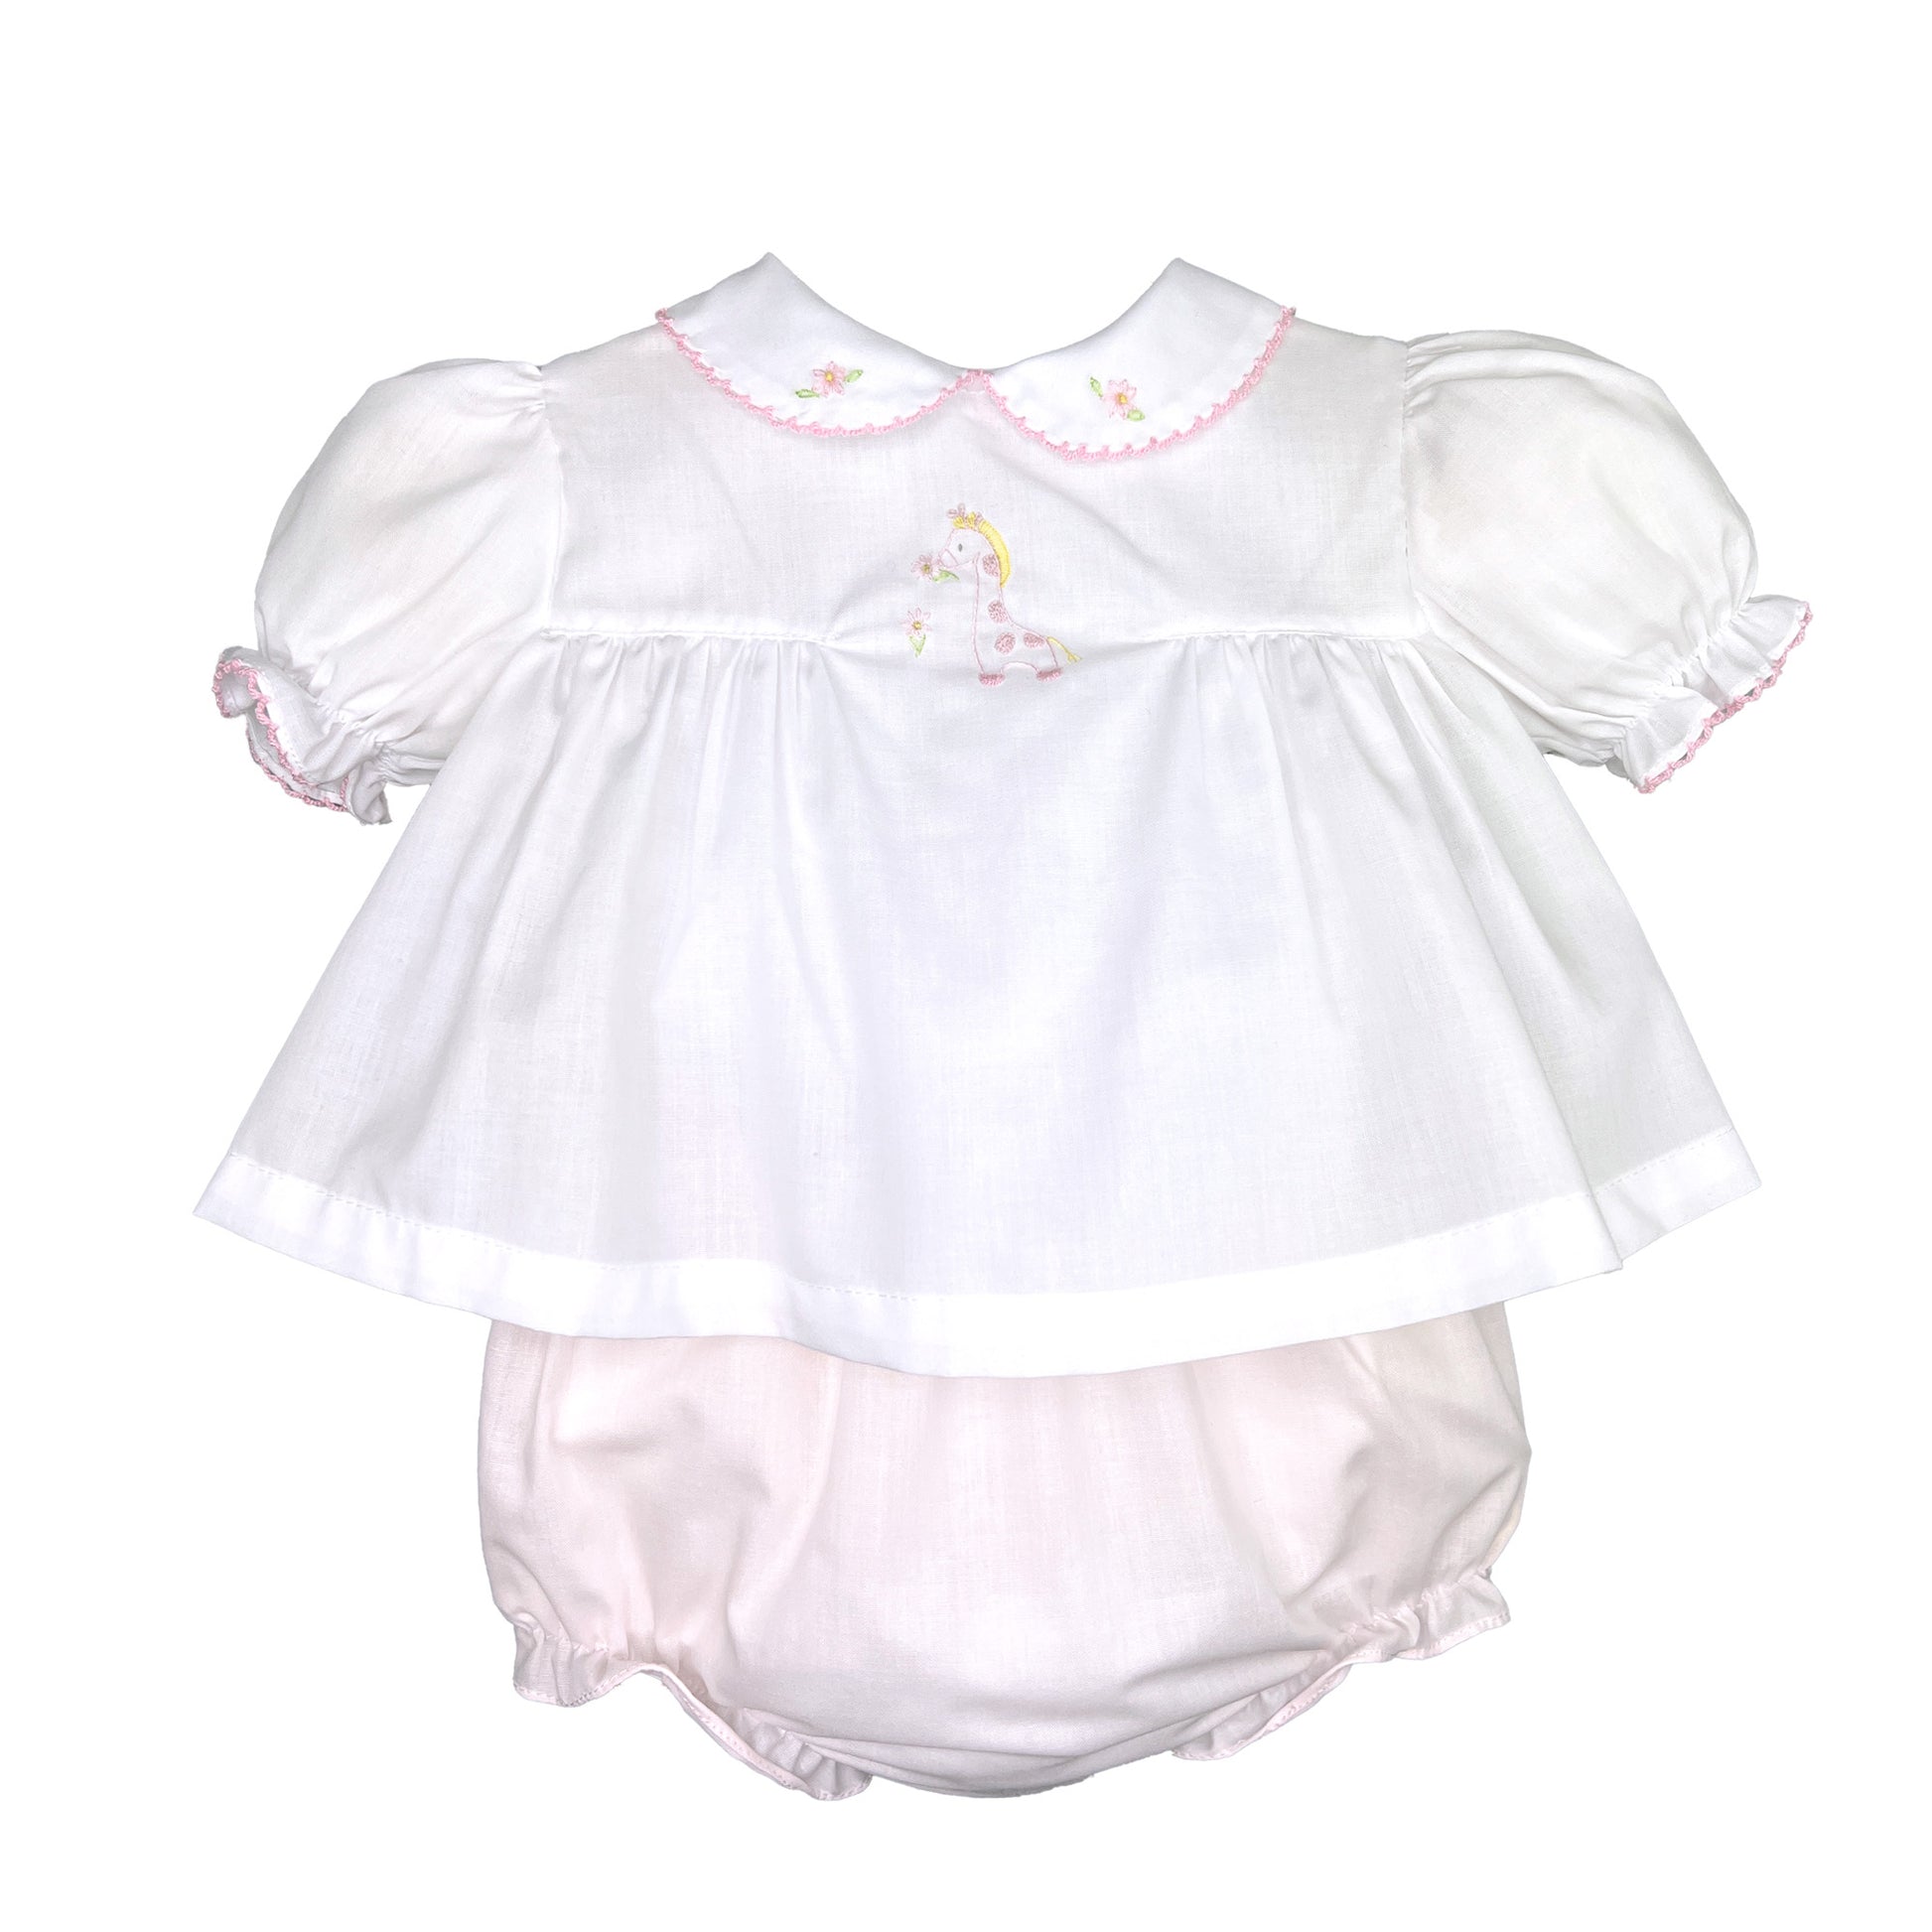 A baby girl's Petit Ami white diaper set - Giraffe with pink bonnet romper and diaper set.